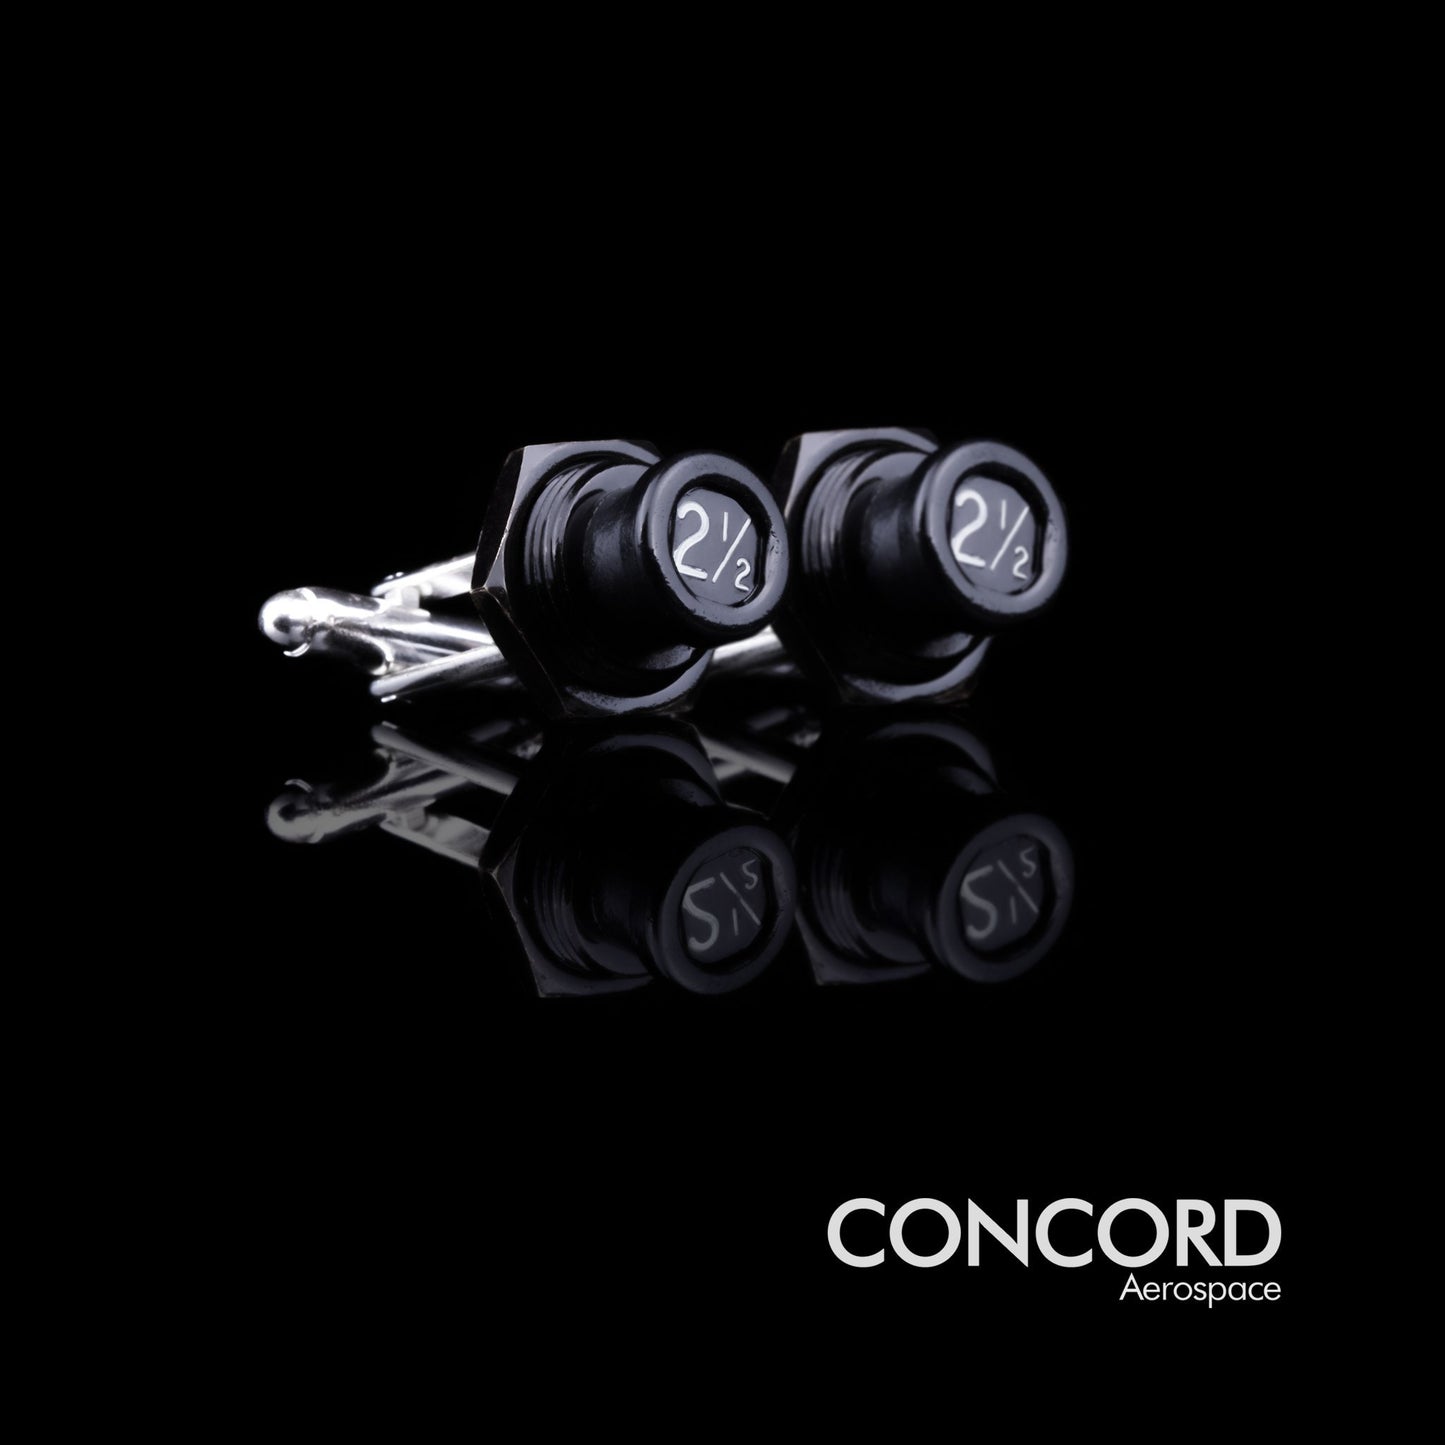 JET CUFFLINKS - CRAFTED FROM THE MIGHTY BOEING 747 - Concord Aerospace Concord Aerospace Concord Aerospace cufflinks